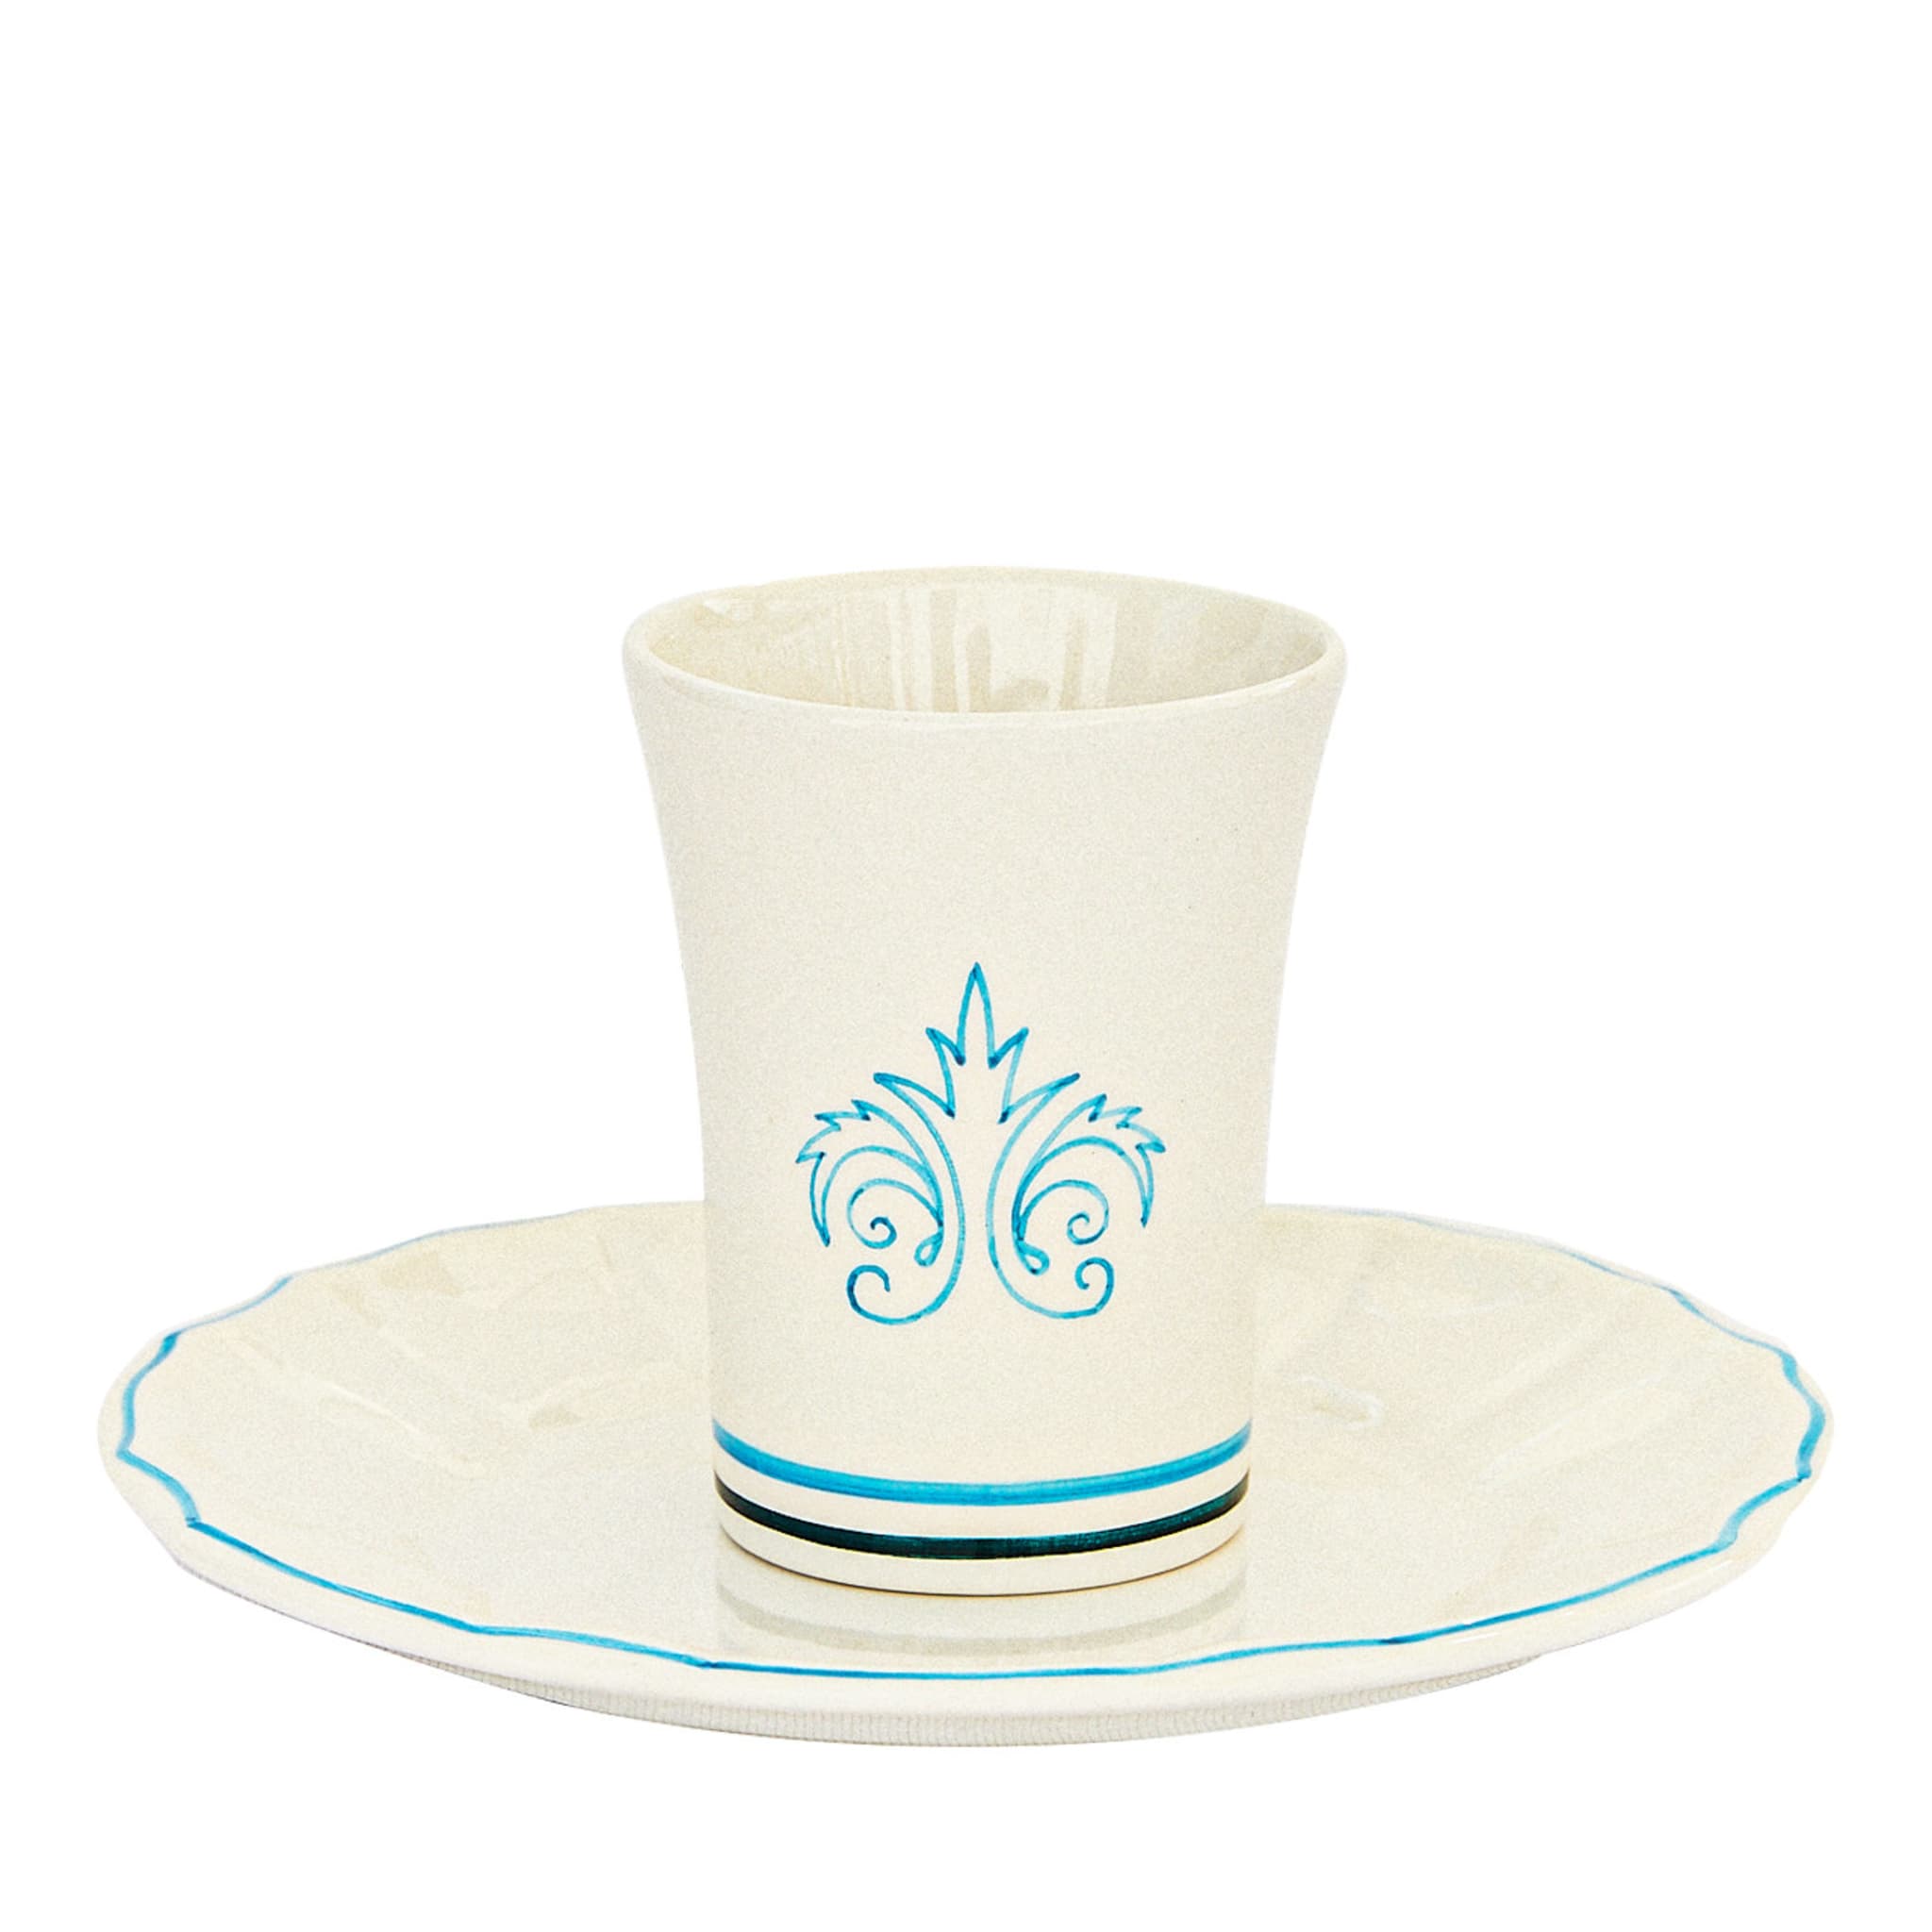 Palm Cup Set - 1 Cup and 1 Dessert Plate - Main view